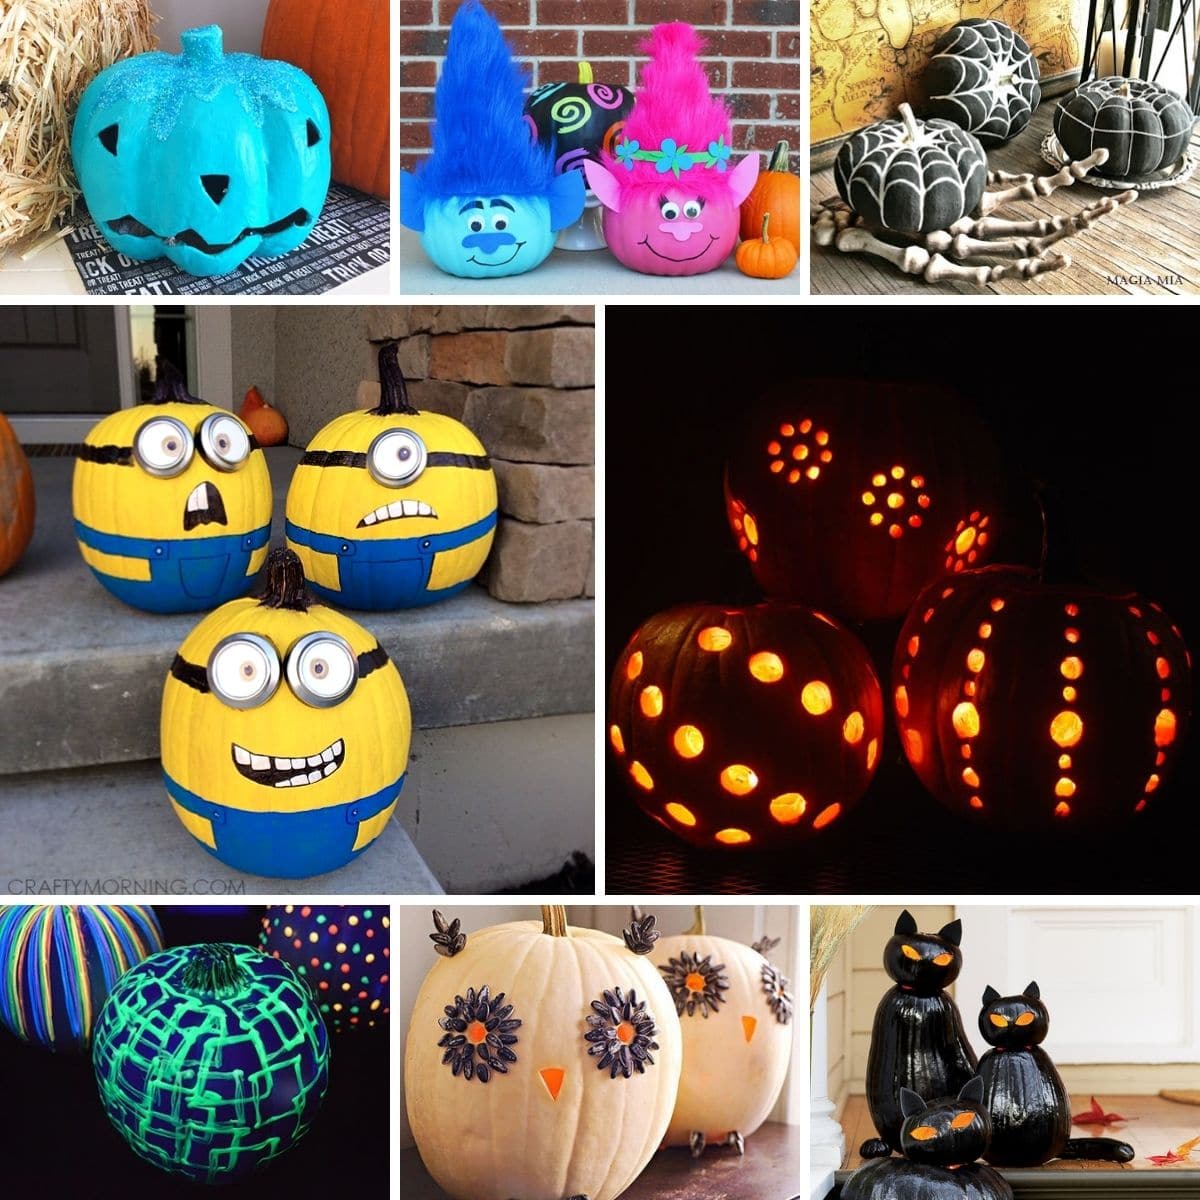 10+ Creative Pumpkin Carving and Decorating Ideas You Can Easily DIY